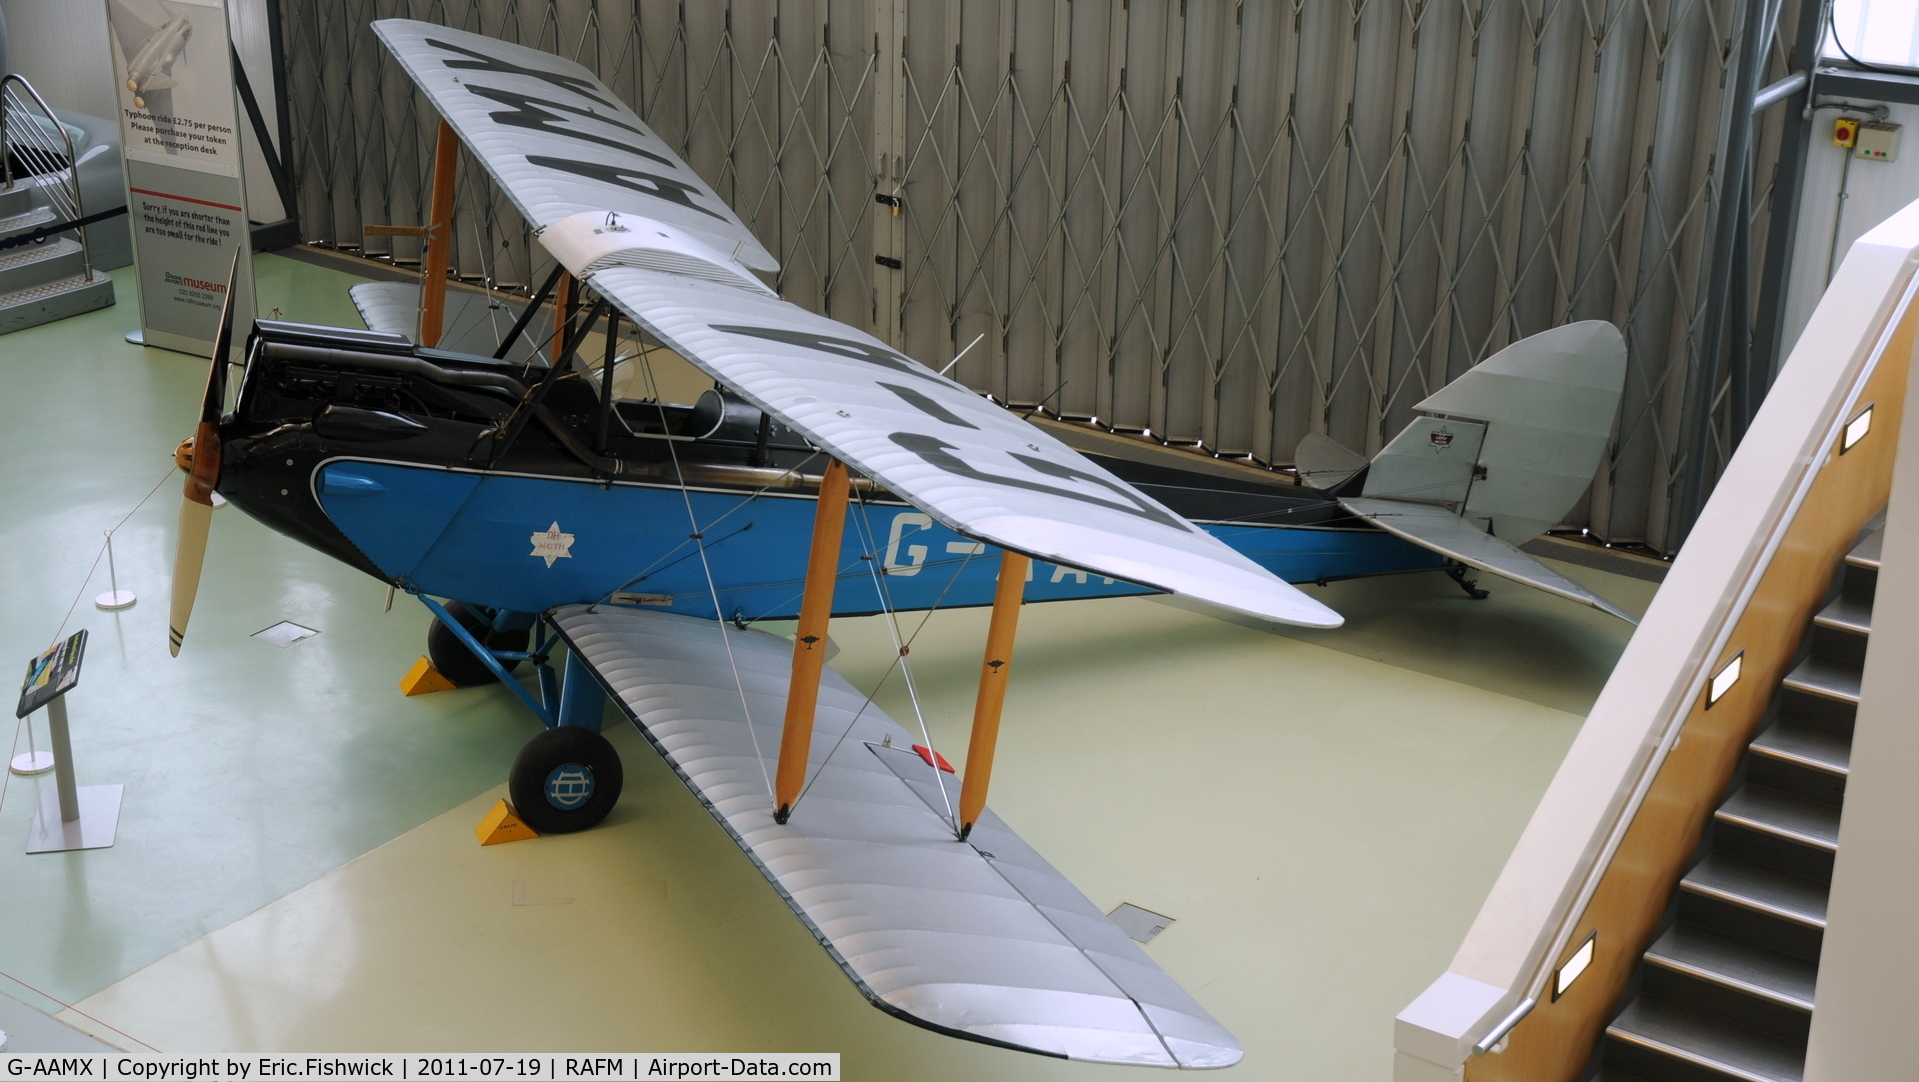 G-AAMX, 1929 De Havilland DH60M Gipsy Moth C/N 125, G-AAMX looking immaculate at the RAF Museum, Hendon, London.